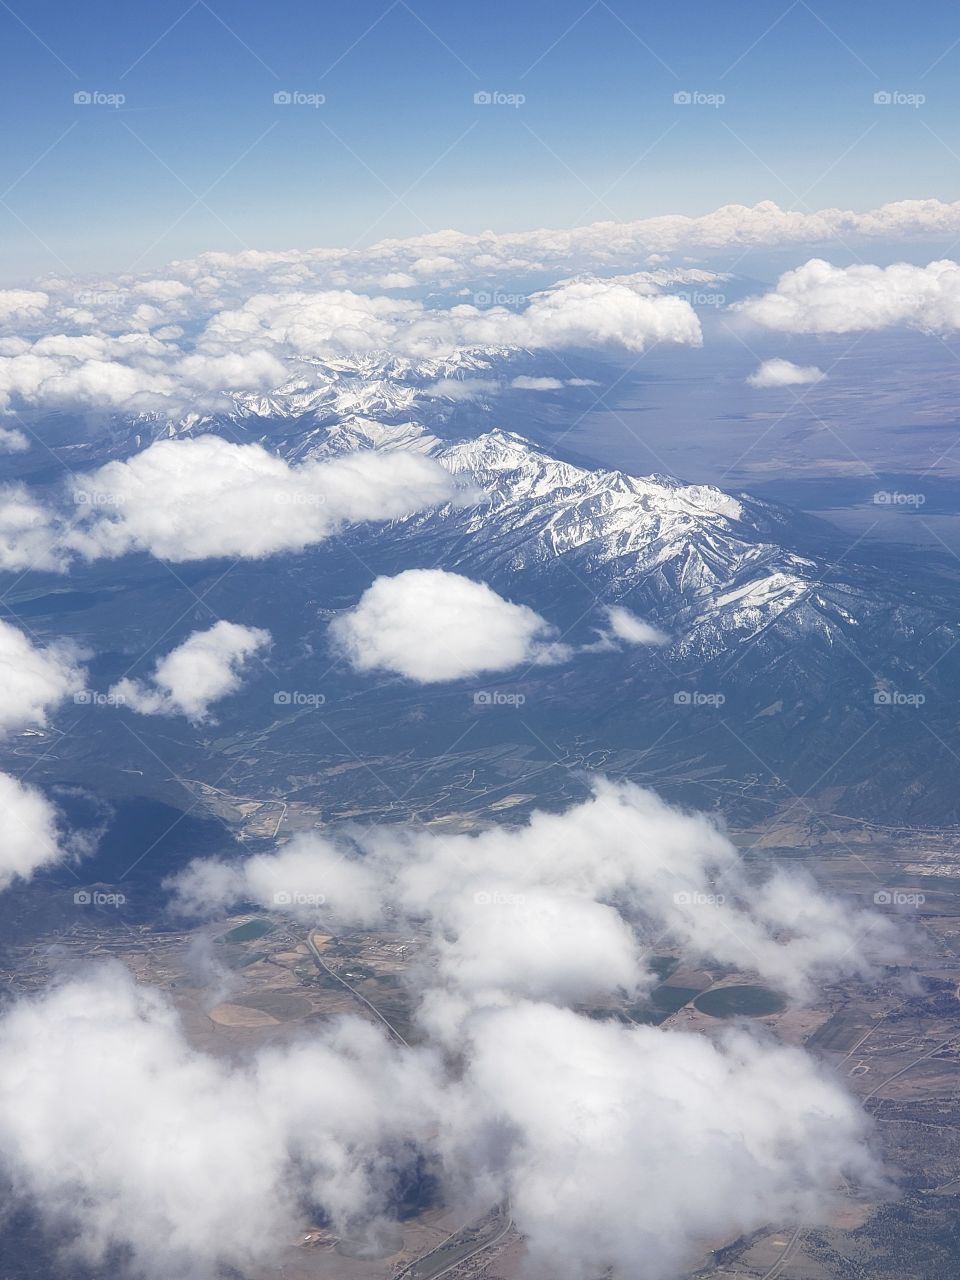 View of the Rocky Mountains from an airplane